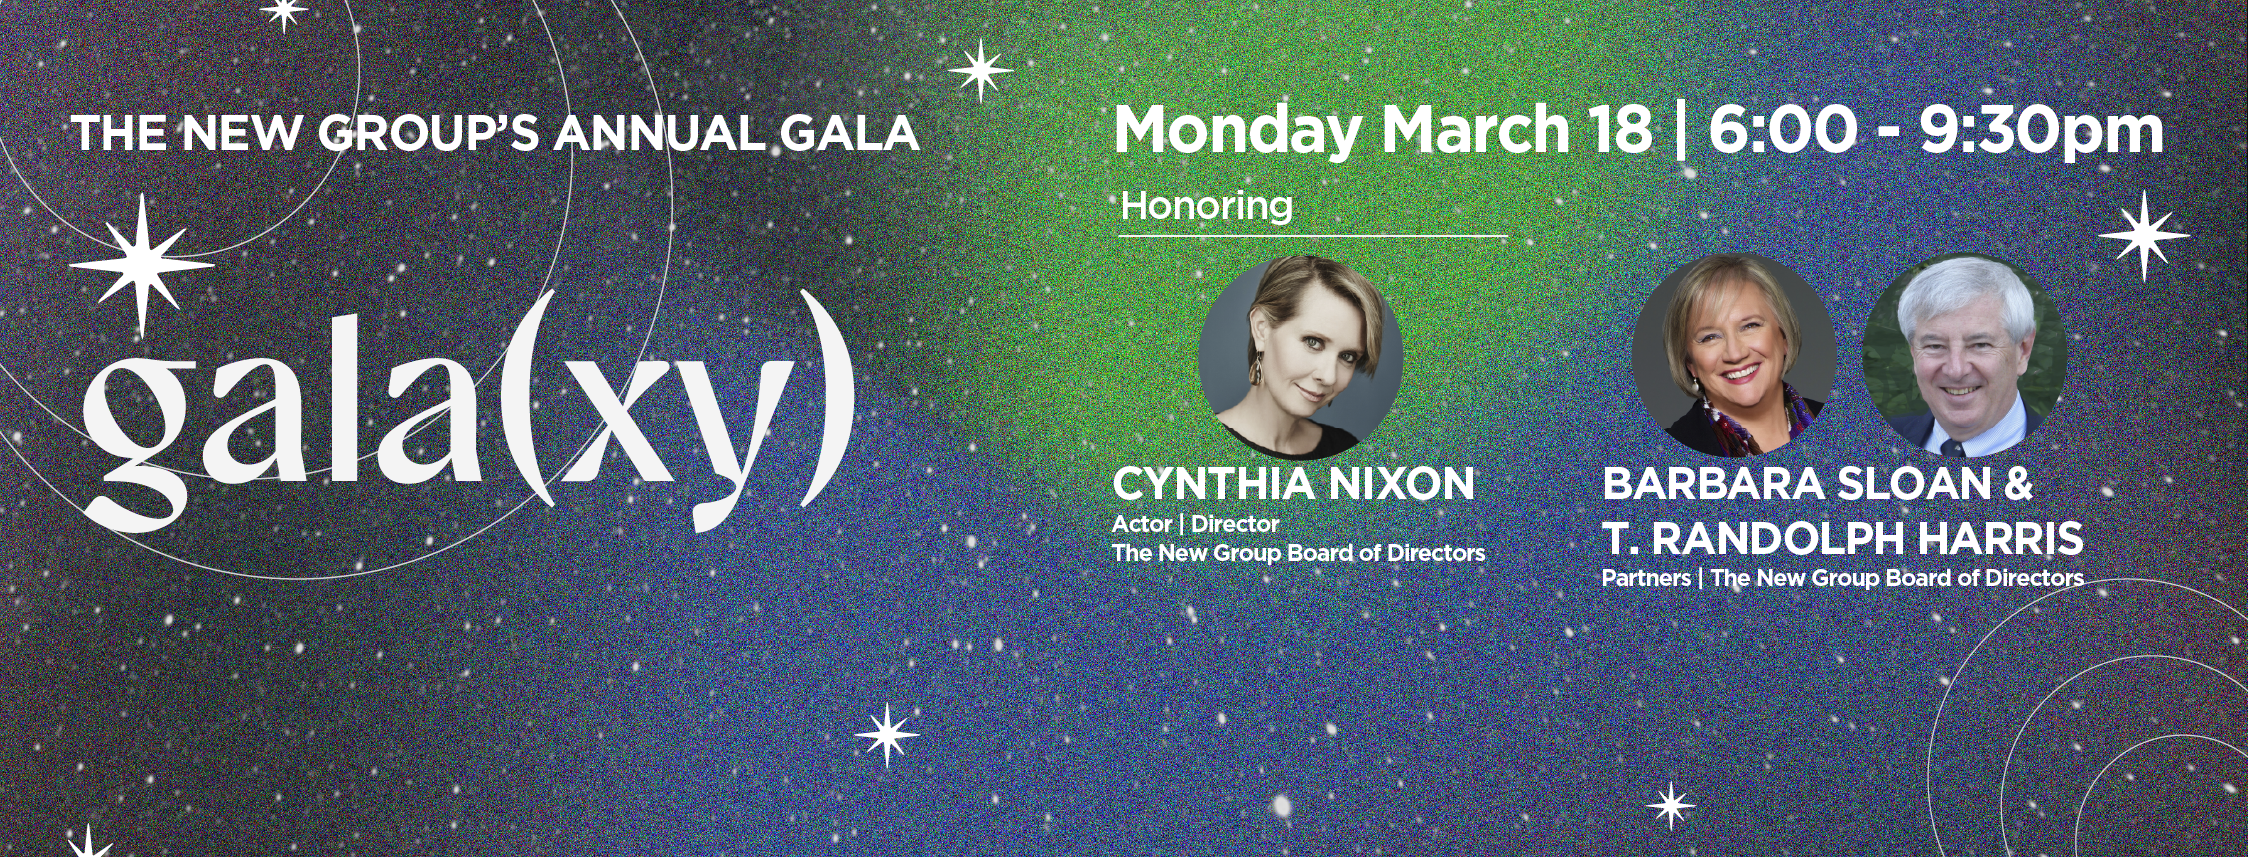 Gala(xy): The New Group's Annual Gala | Monday, March 18 6-9:30pm